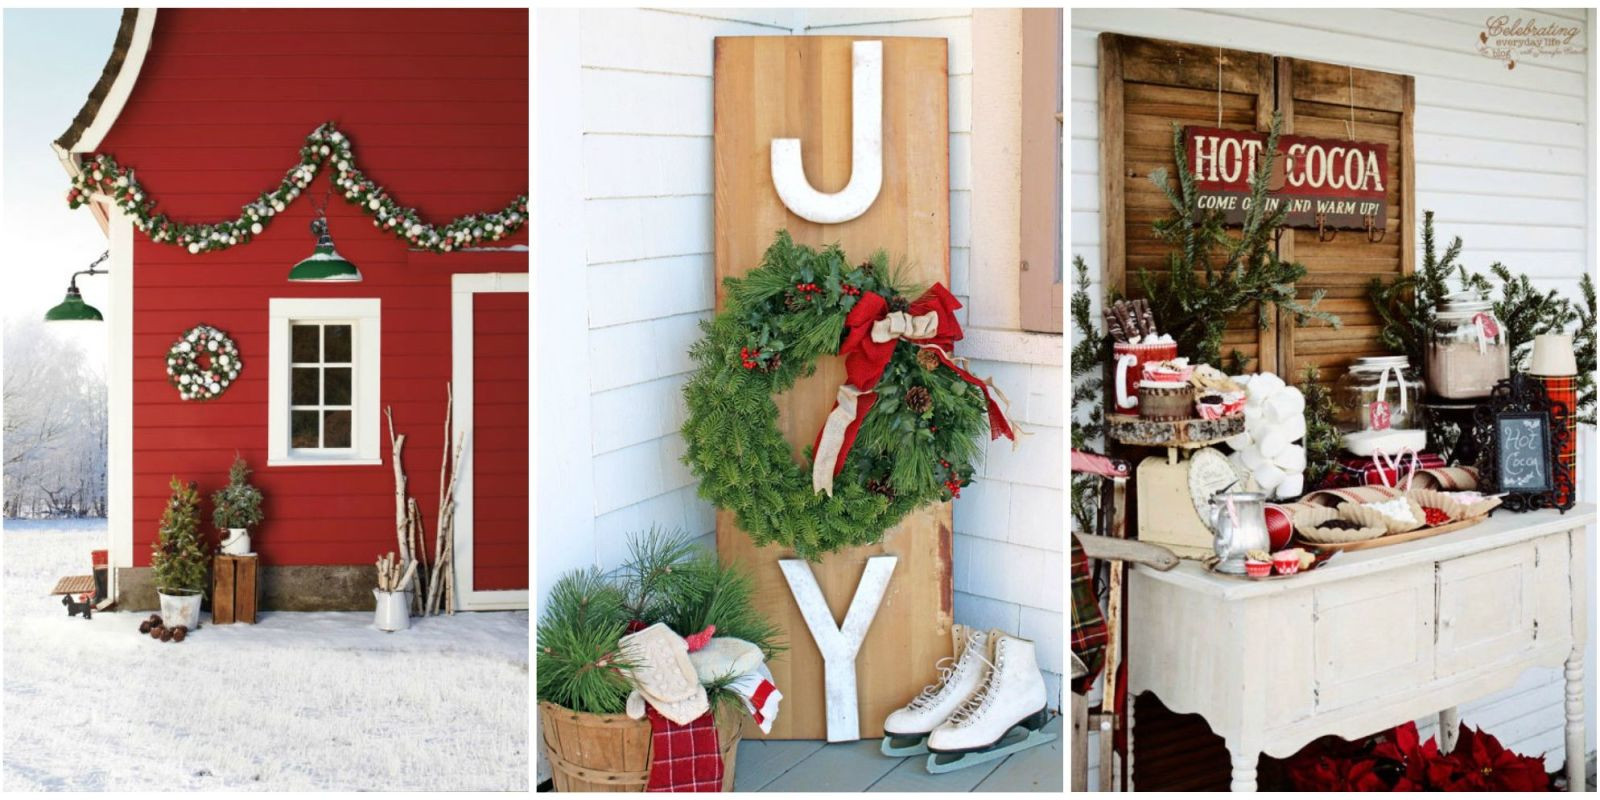 Christmas Decorations Outdoor
 34 Outdoor Christmas Decorations Ideas for Outside